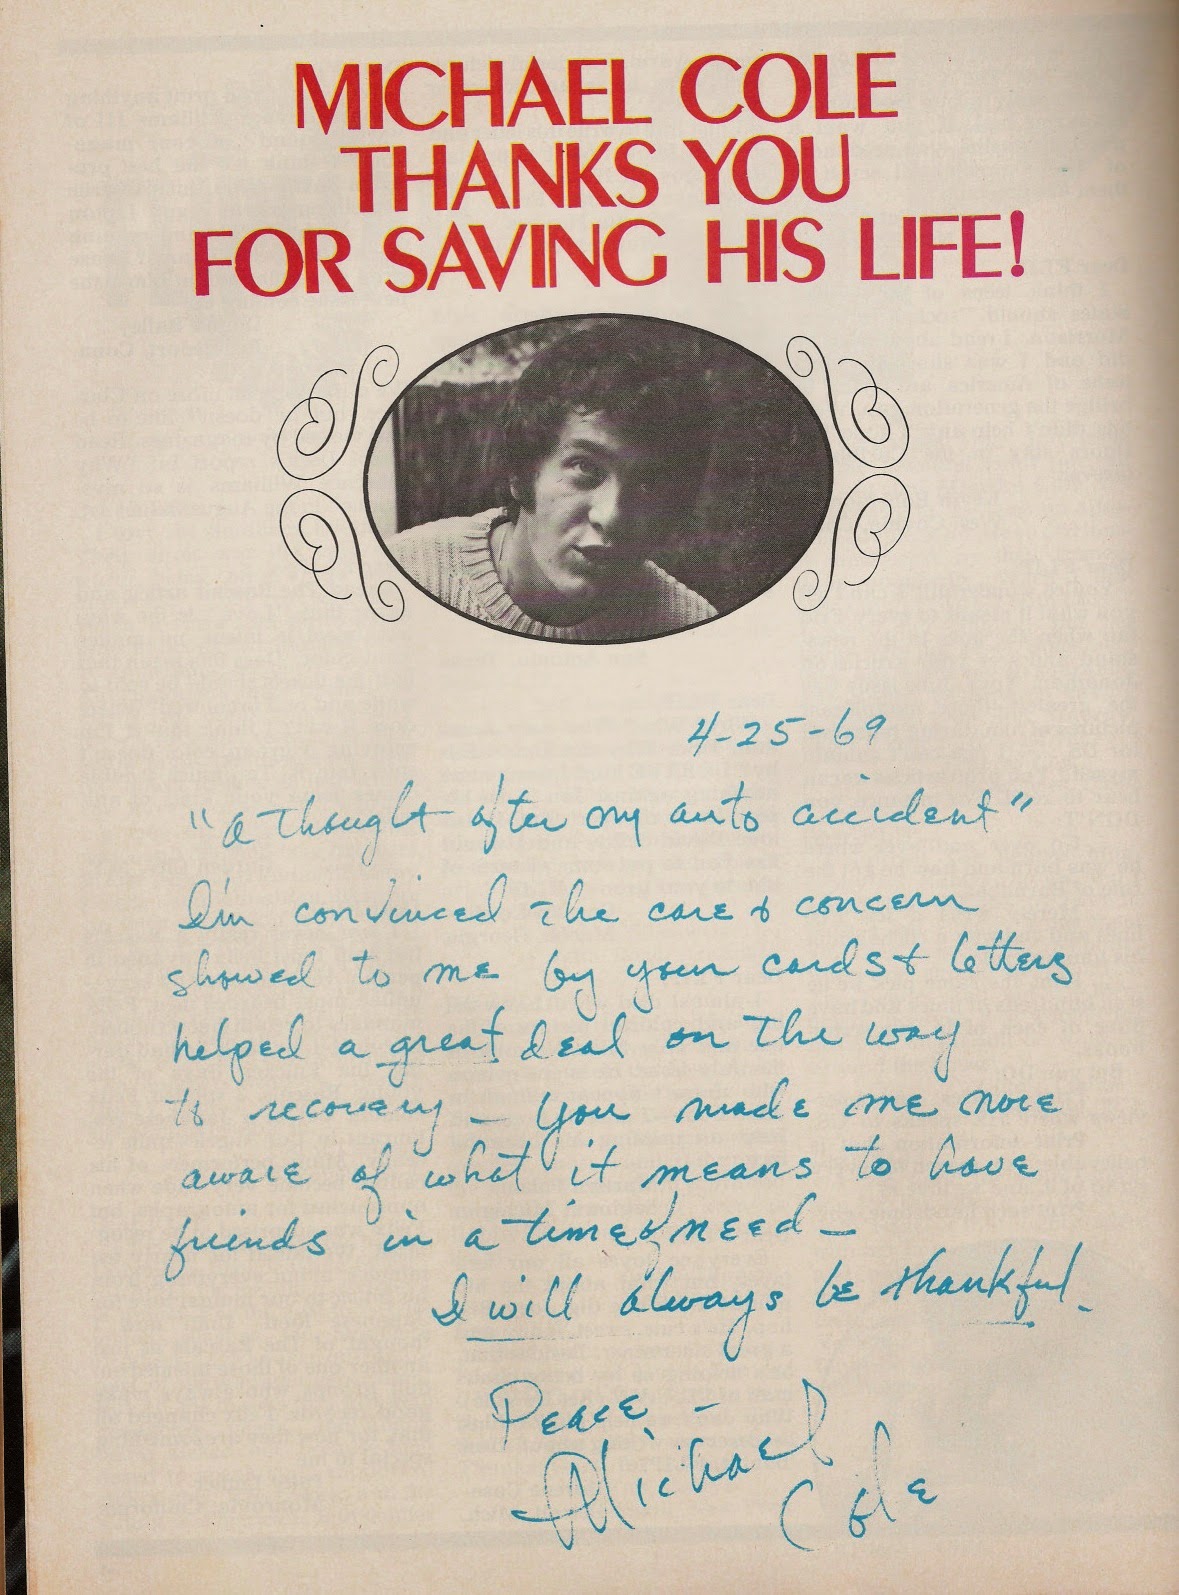 Friends of Michael Cole and fans of The Mod Squad.: Thank you letter after the car ...1179 x 1595